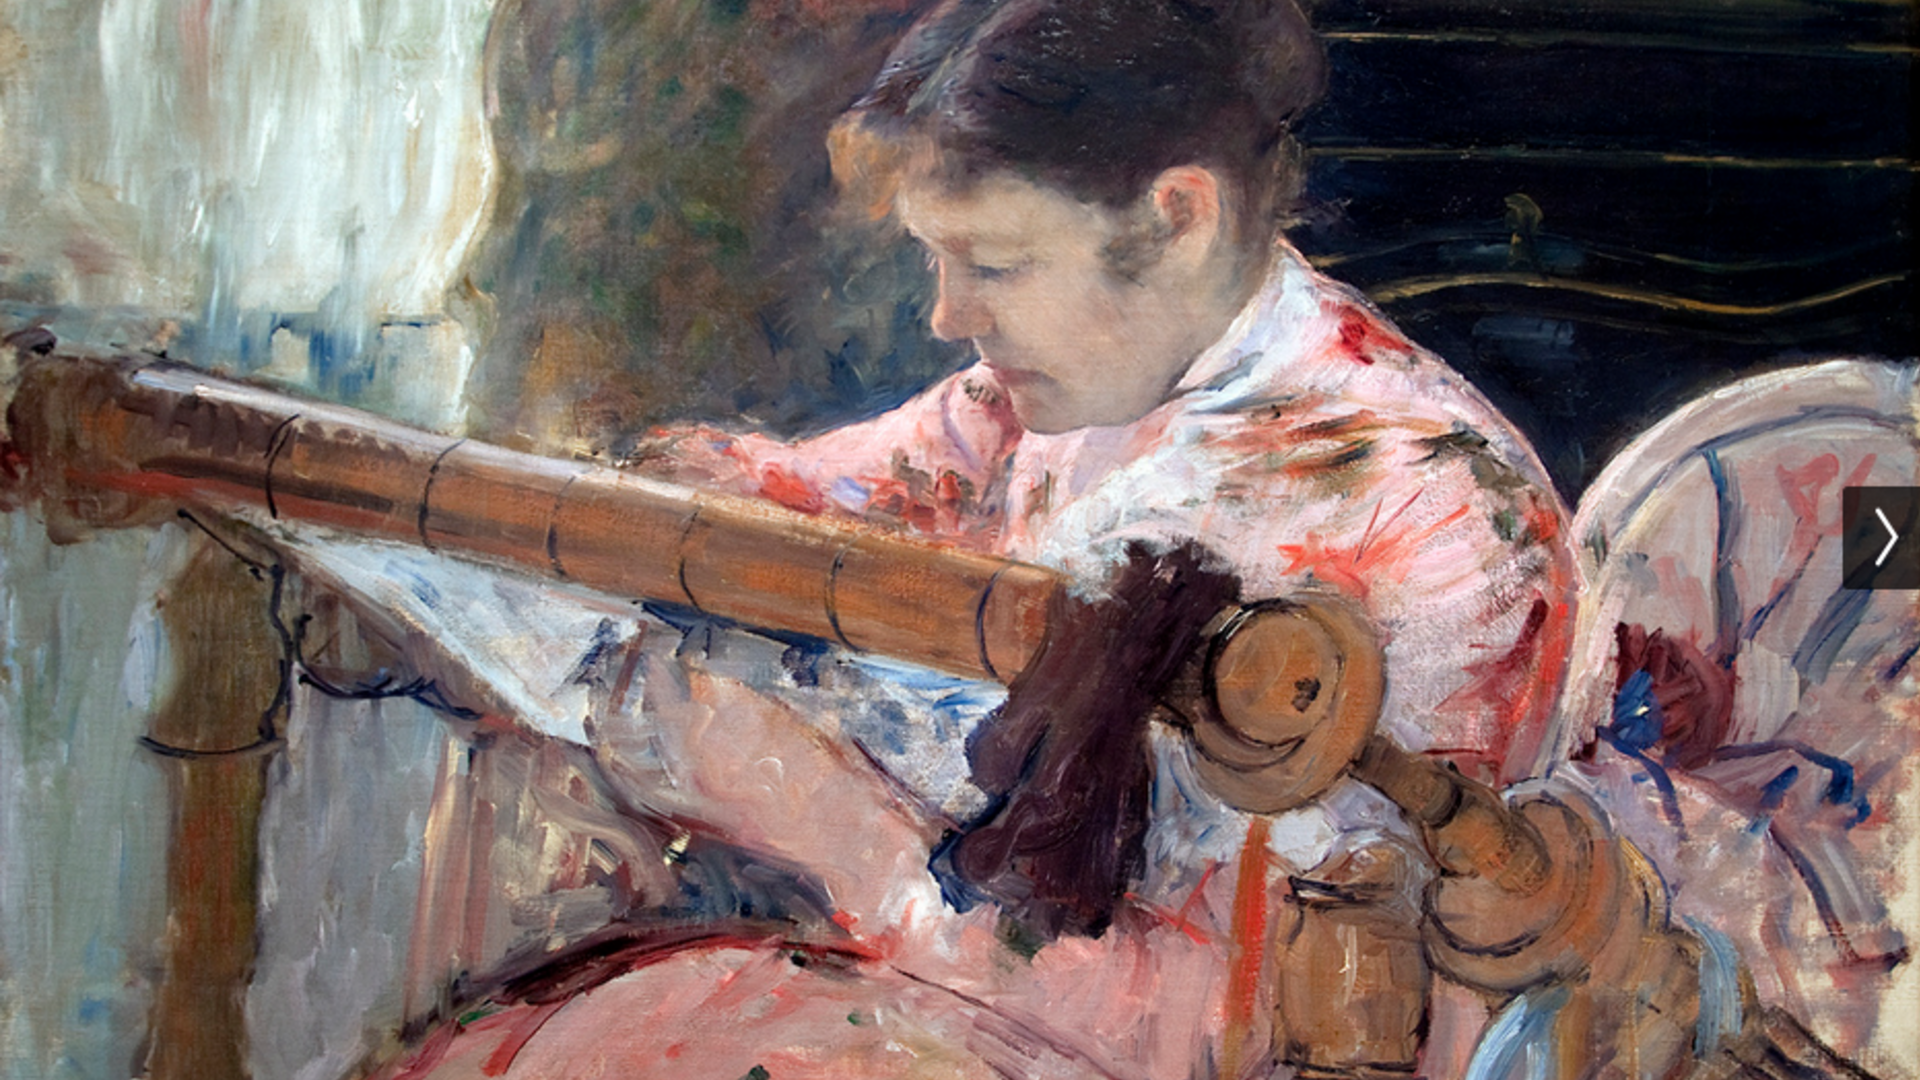 Mary Cassatt (American, 1844–1926), Lydia at a Tapestry Frame, ca. 1881, oil on canvas. Flint Institute of Arts: Gift of The Whiting Foundation, 1967.32